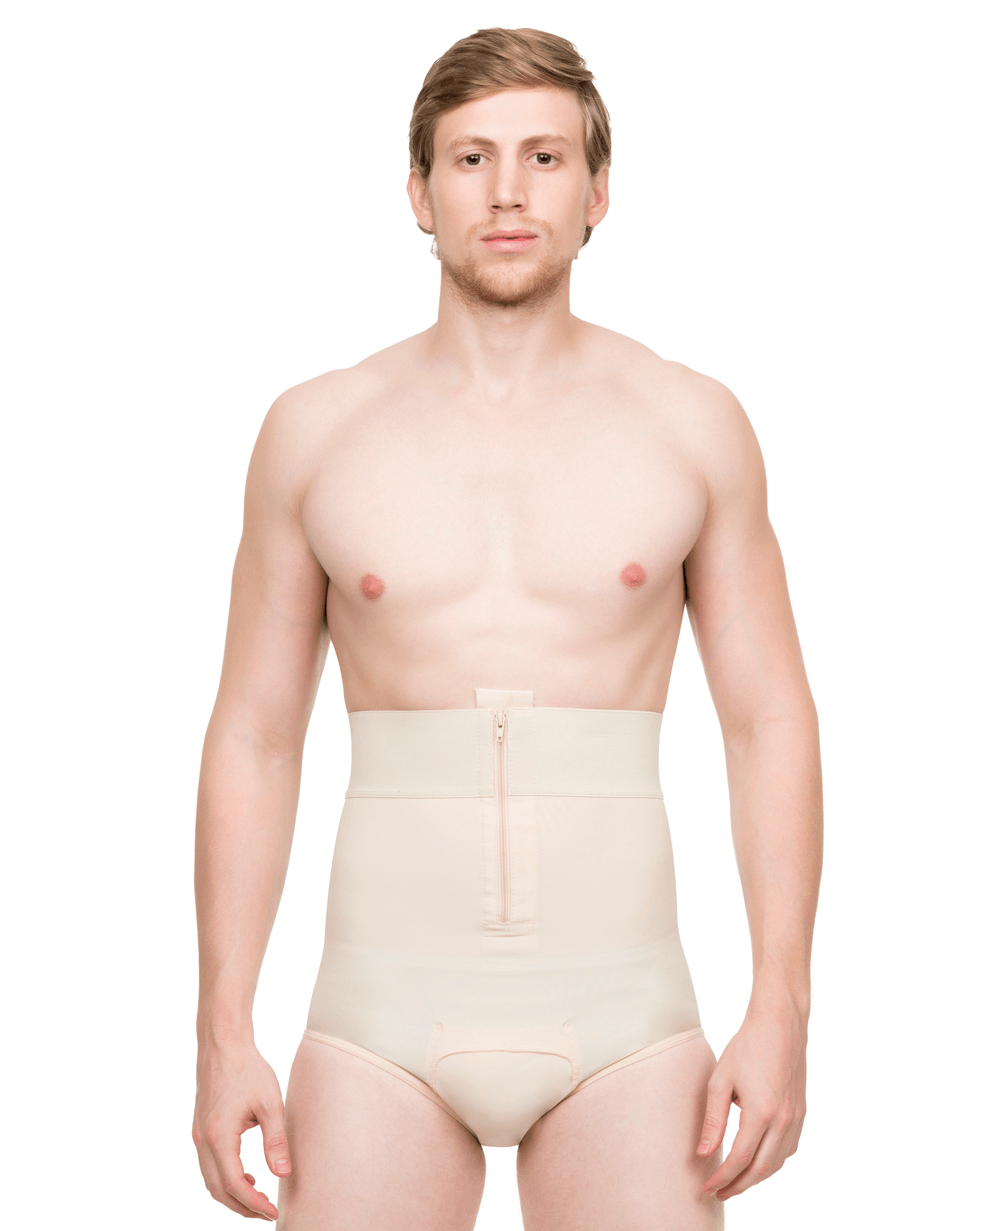 Are Compression Garments Necessary After Body Contouring Surgery?